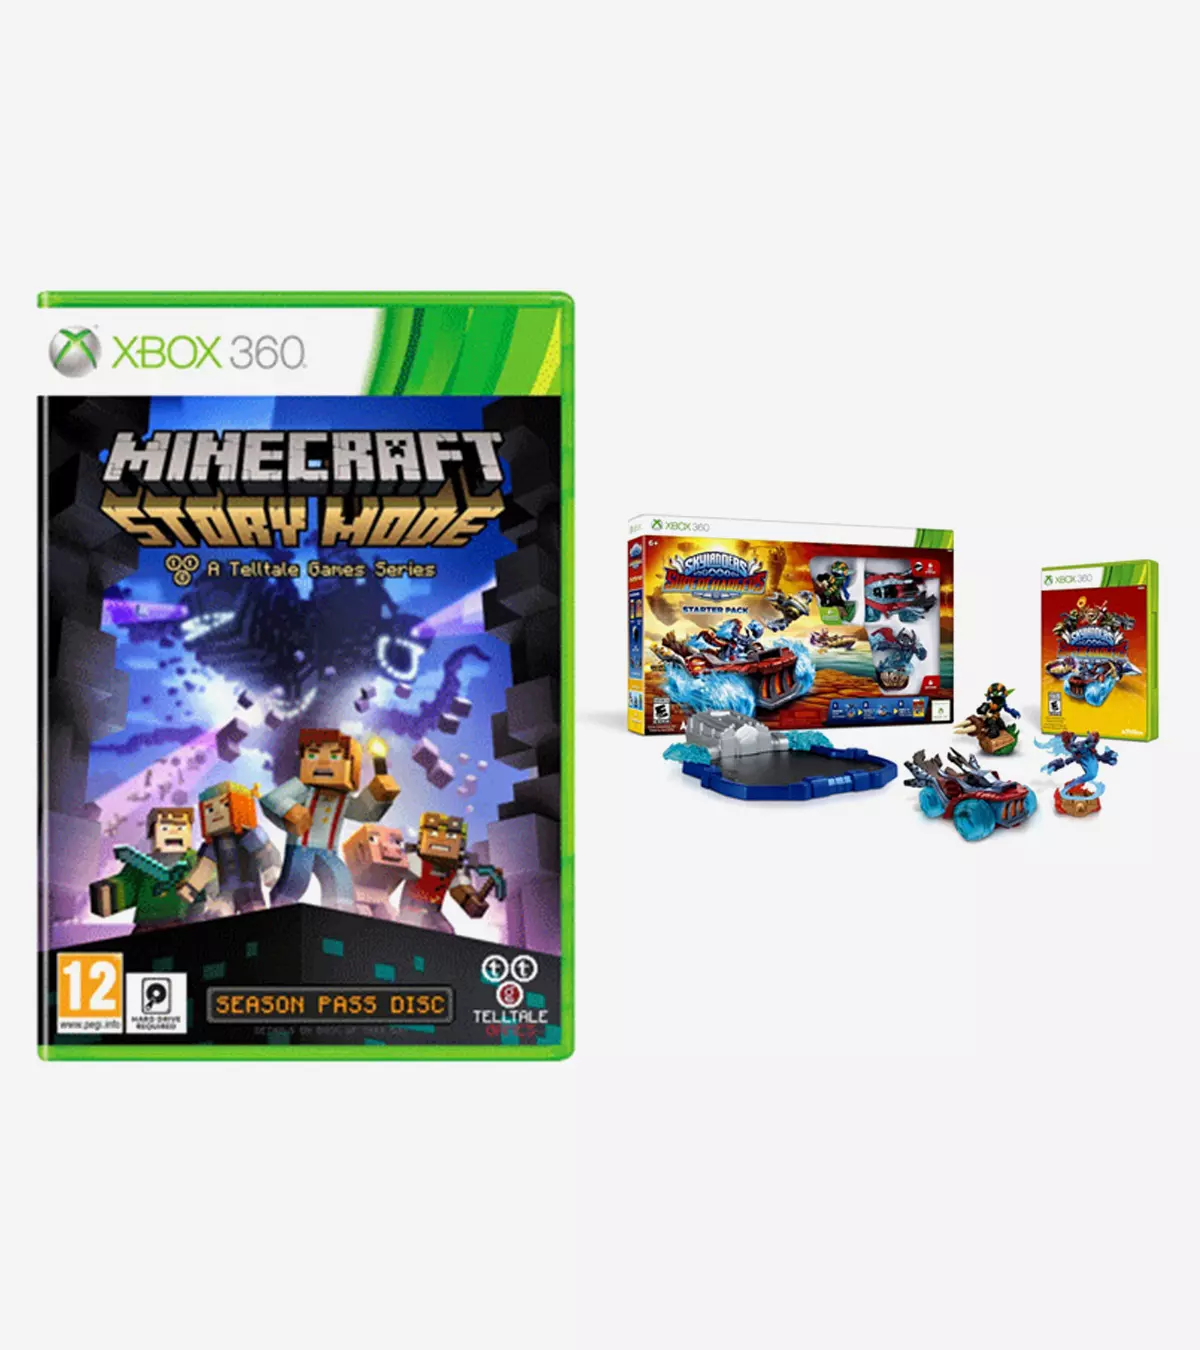 Time to let your child jump into a world of excitement with the finest Xbox 360 games.